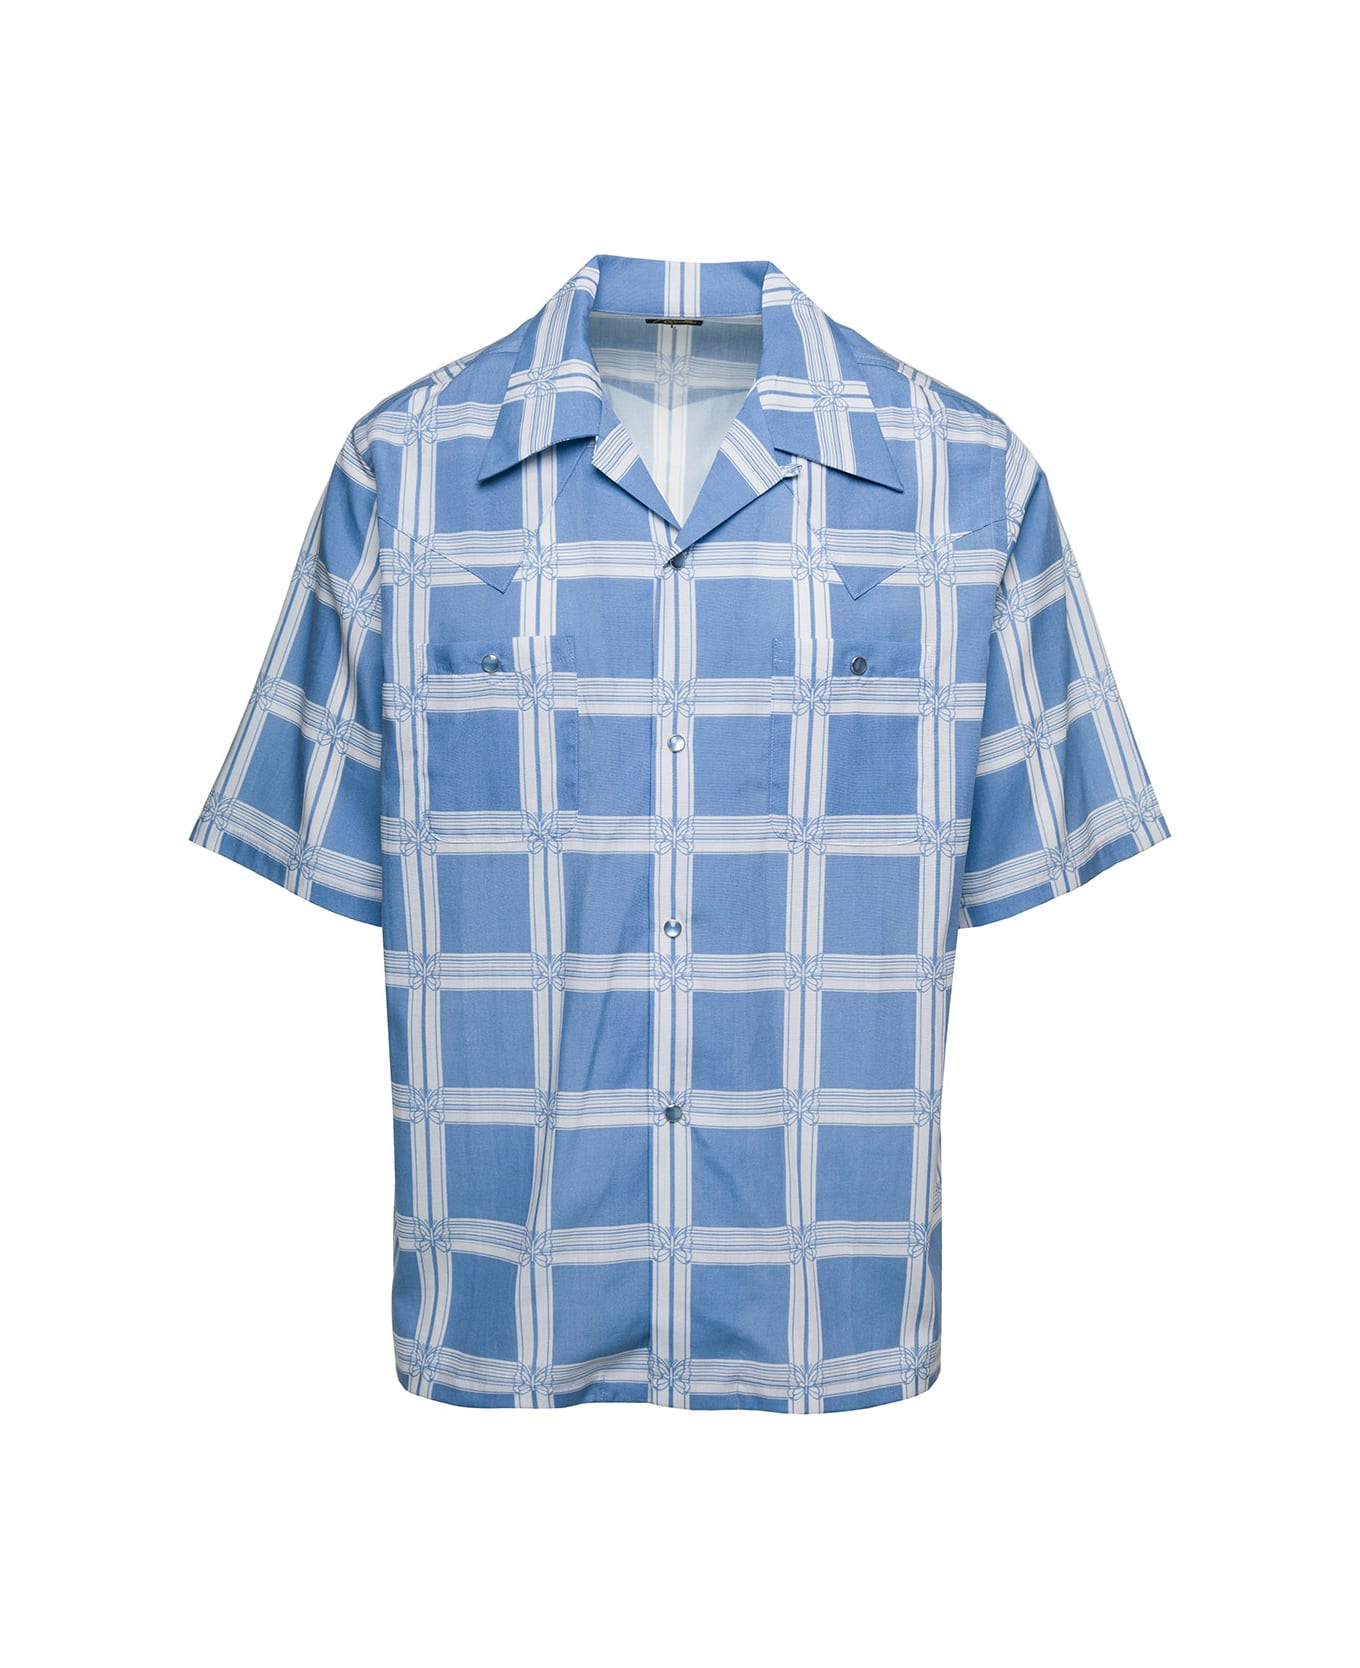 Needles Light Blue Bowling Shirt With All-over Graphic Print In Cotton Blend Man - Light blue